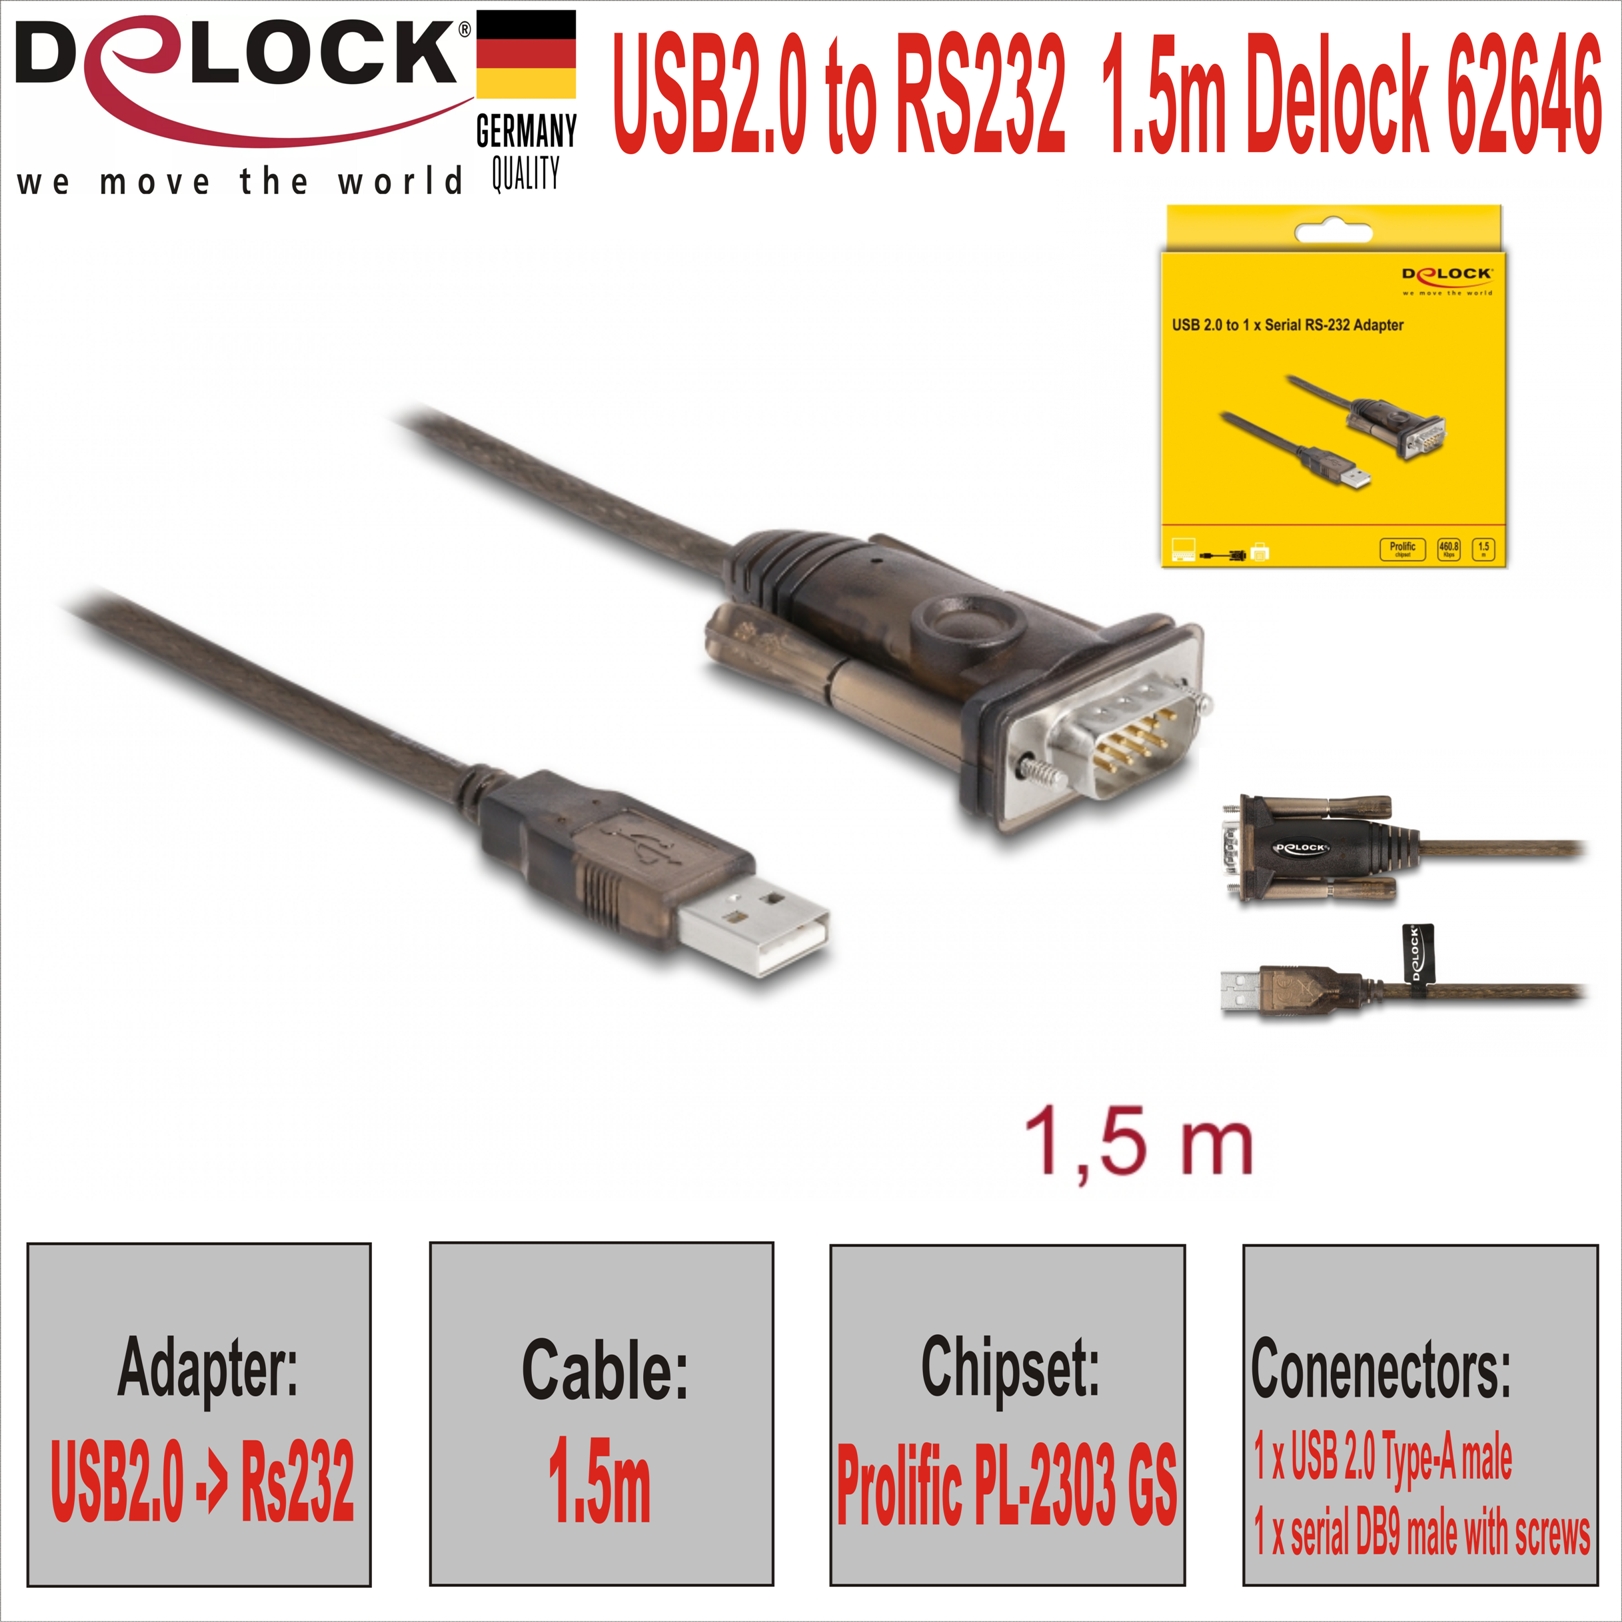 USB2.0 to RS232  1.5m Delock 62646